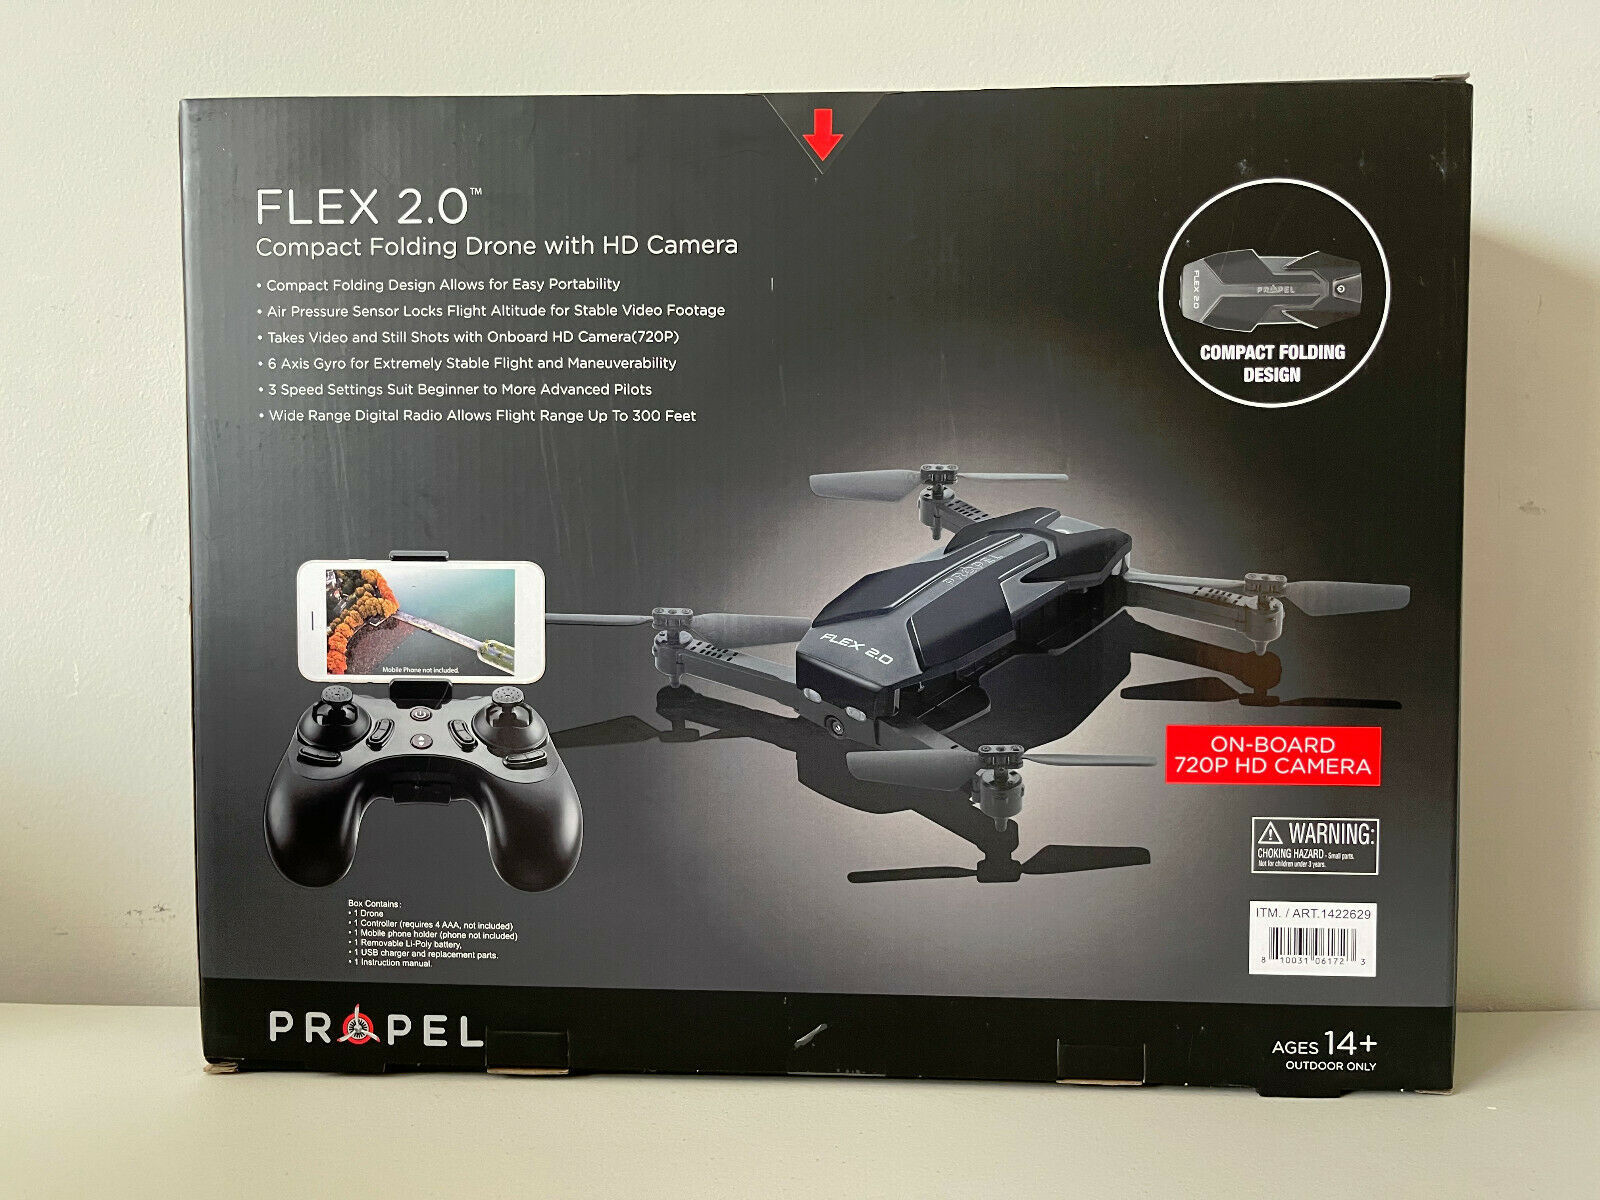 Propel FLEX 2.0 Compact Folding Drone with HD Camera 